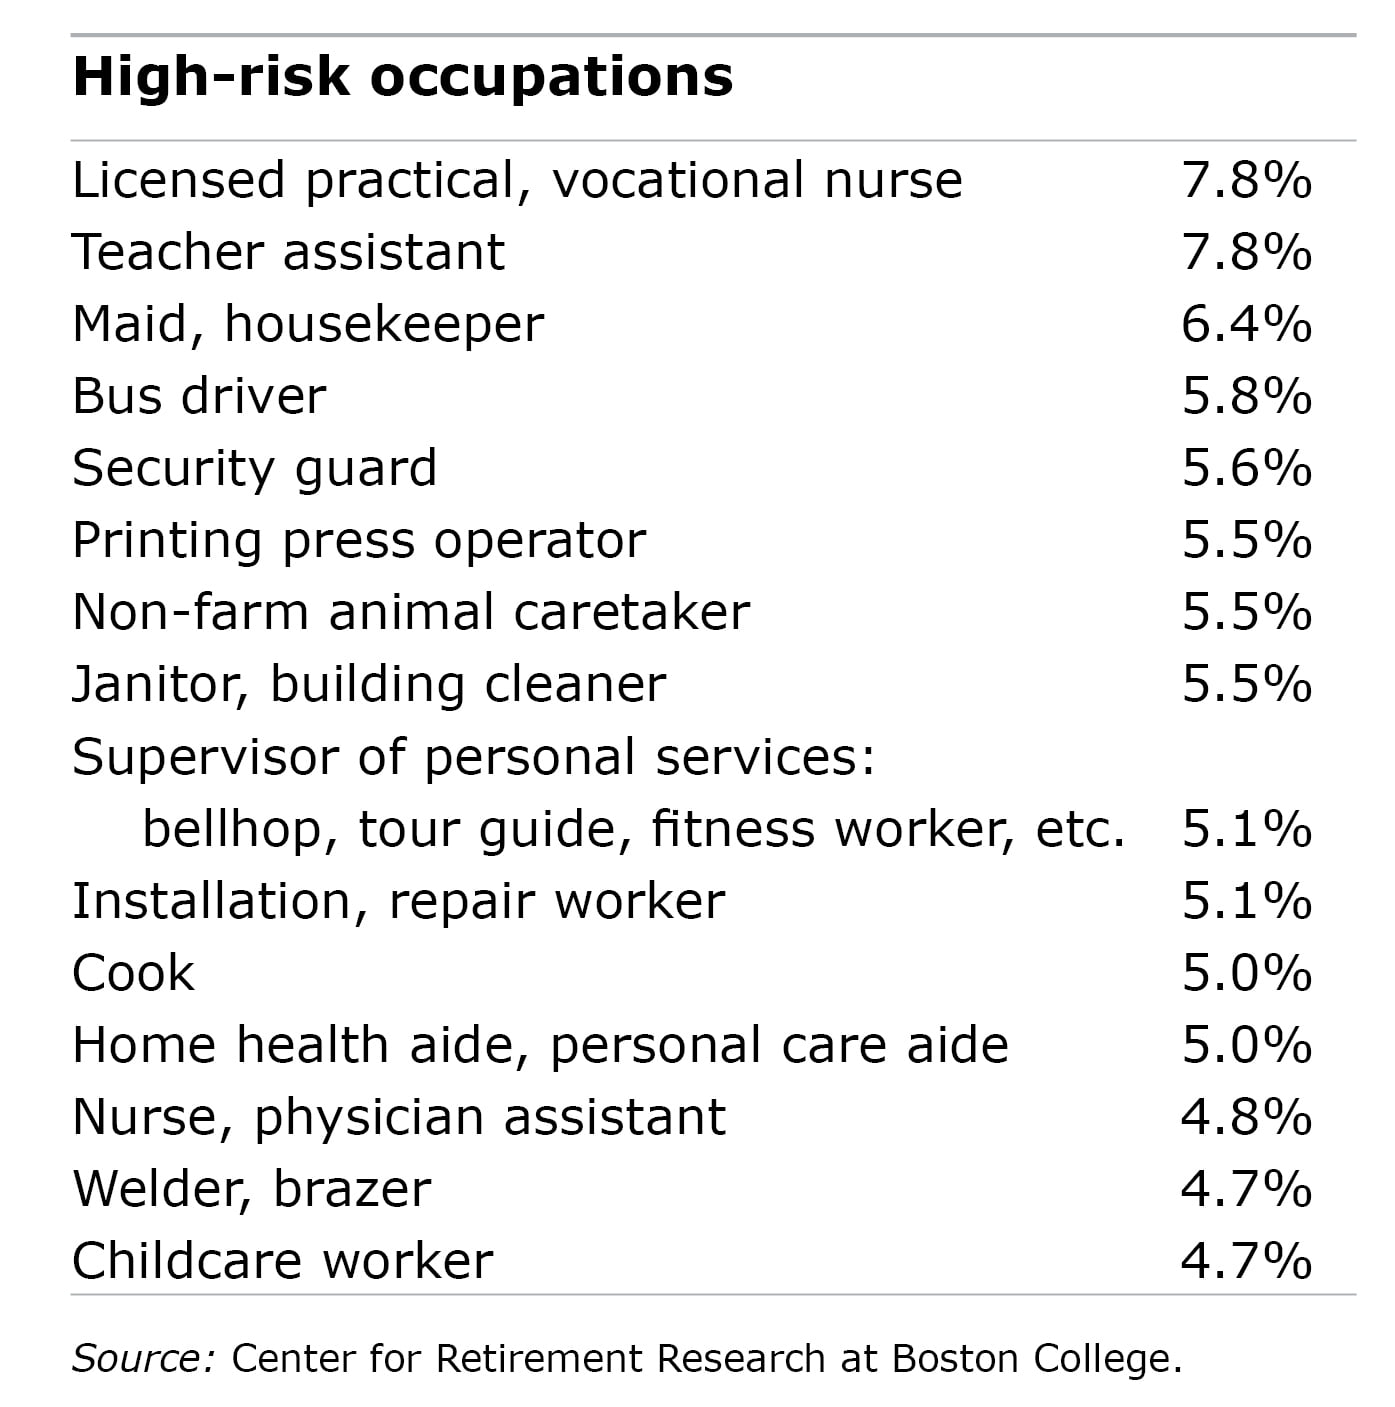 Table showing high-risk occupations